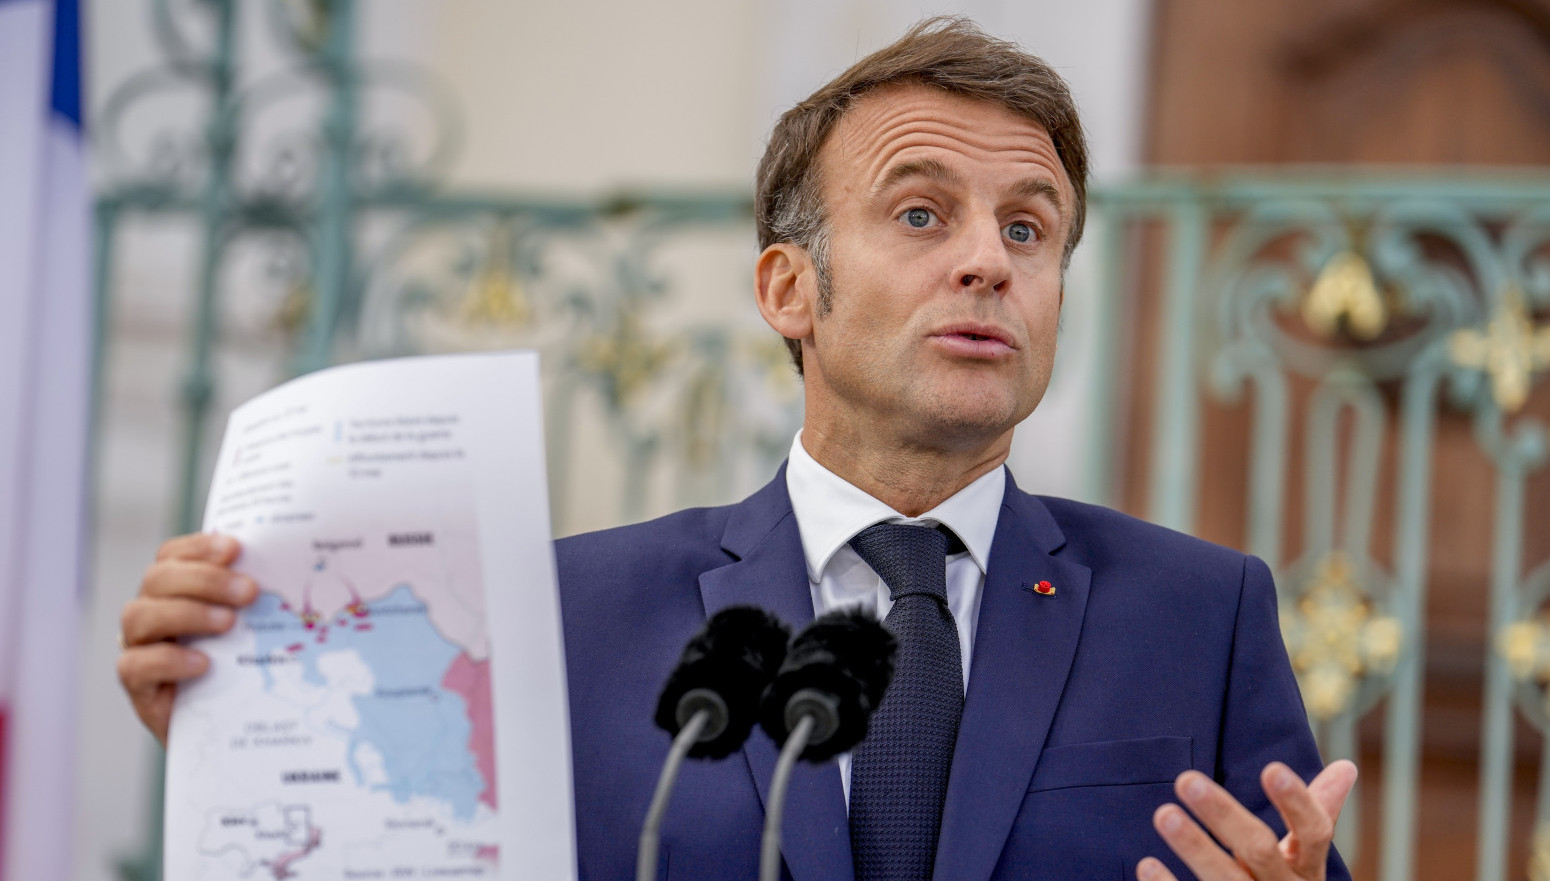 Macron waved a map and shouted: "How do we explain this to Ukraine?!" VIDEO